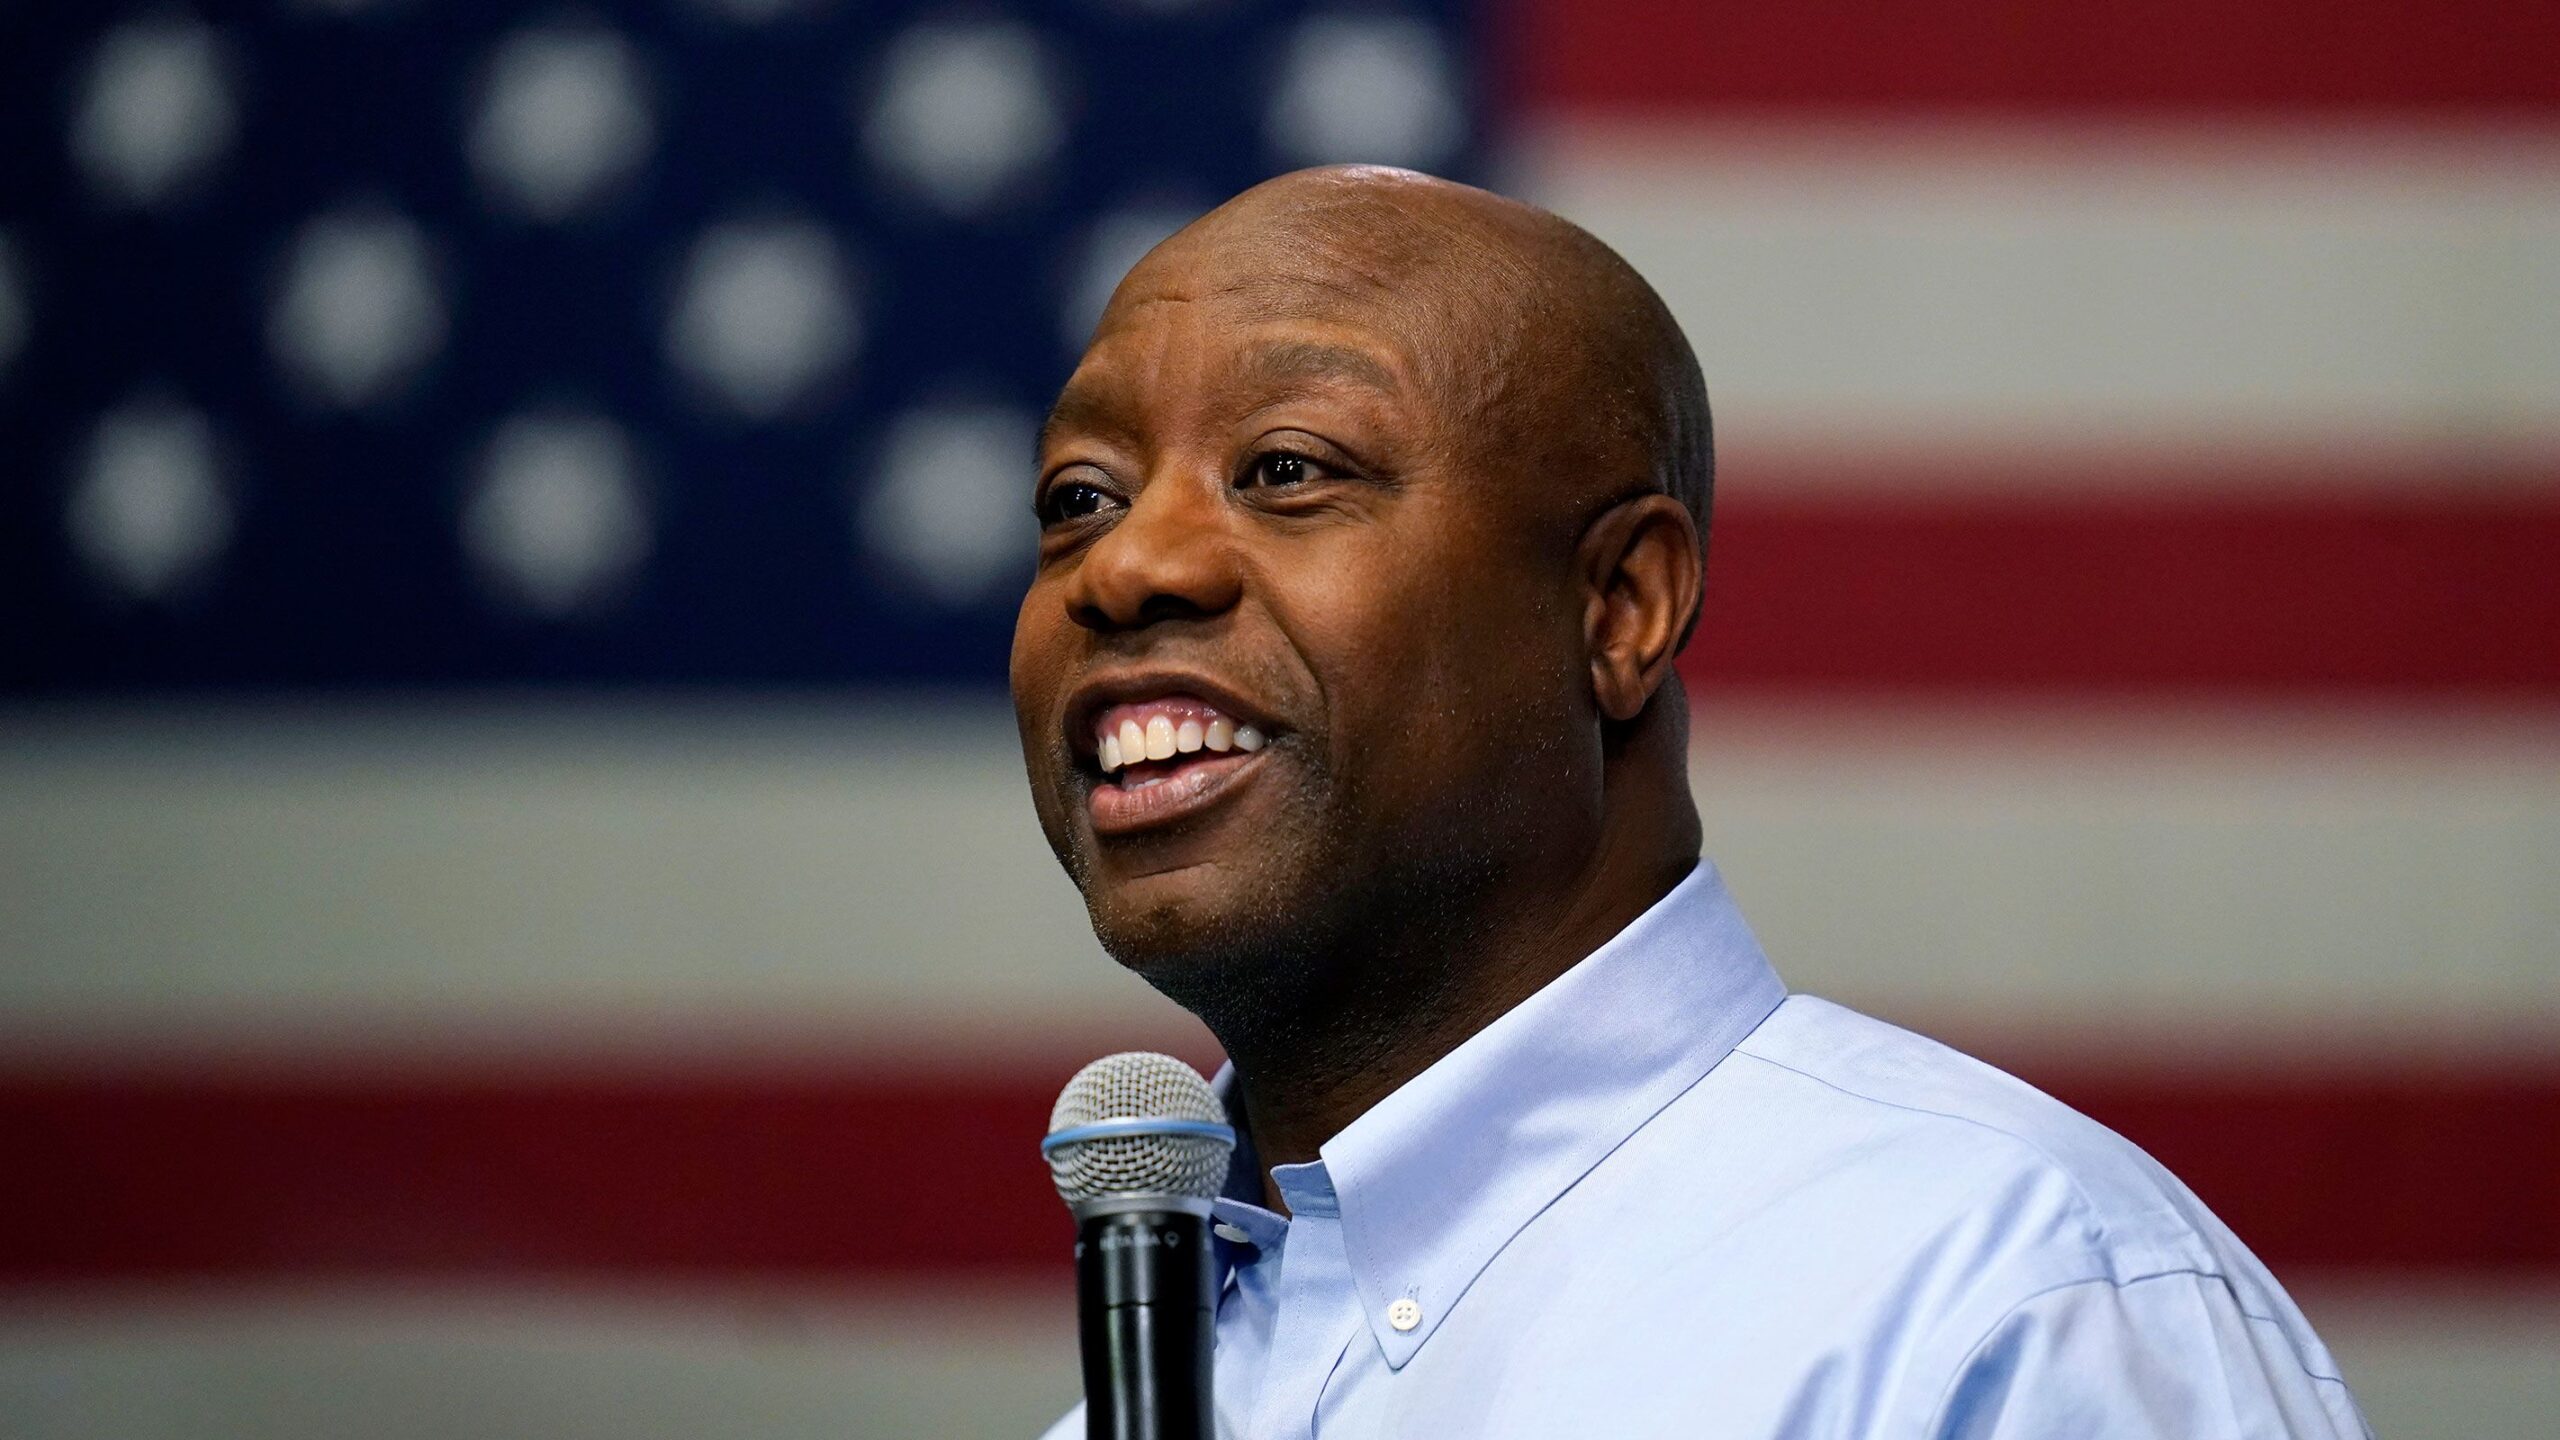 South Carolina Sen. Tim Scott will formally enter the Republican presidential primary on Monday, Ma...